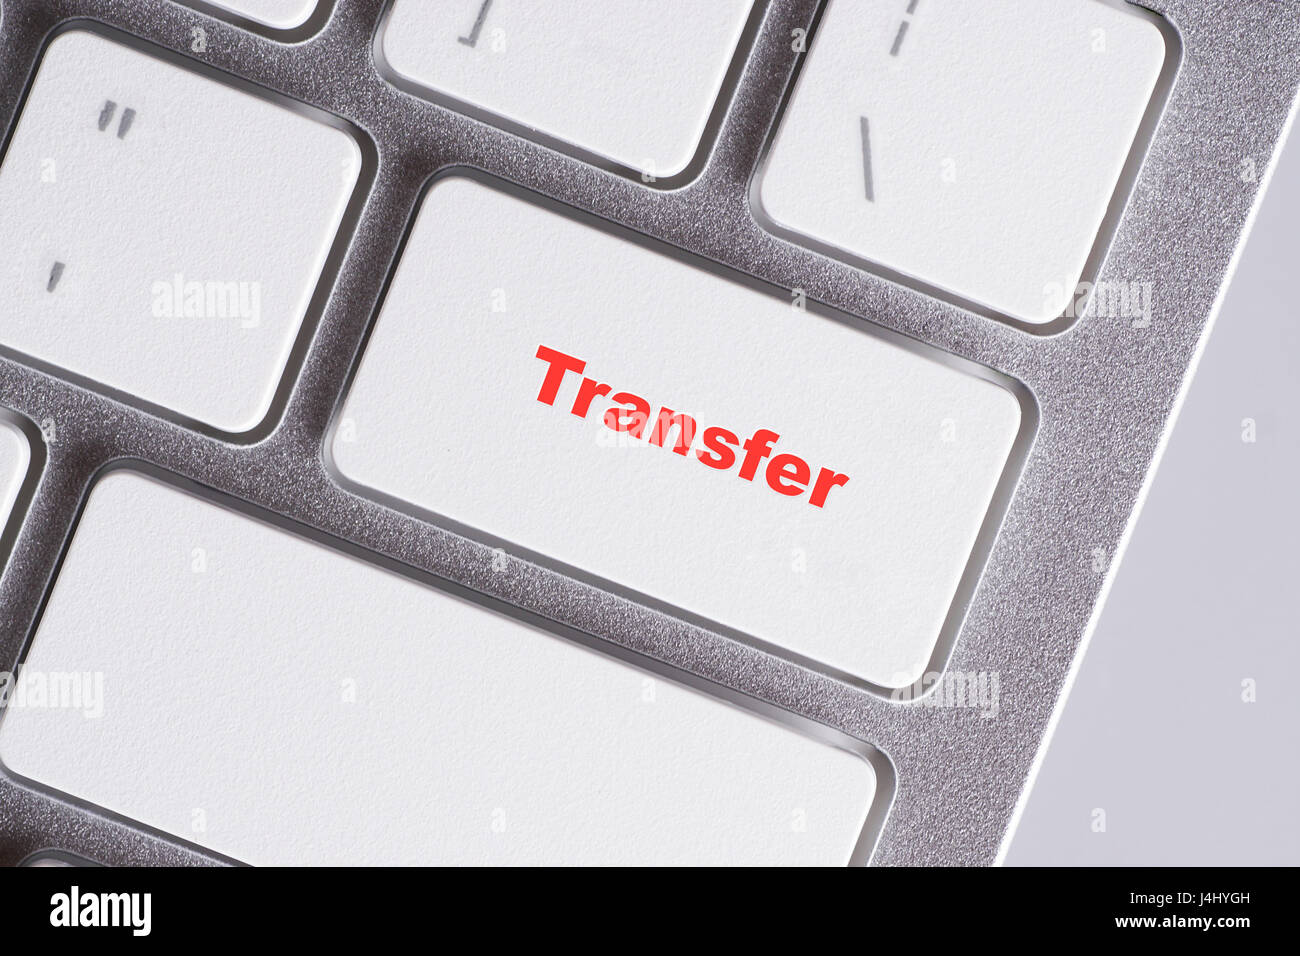 'Transfer' red words on white keyboard - online, education and business concept Stock Photo